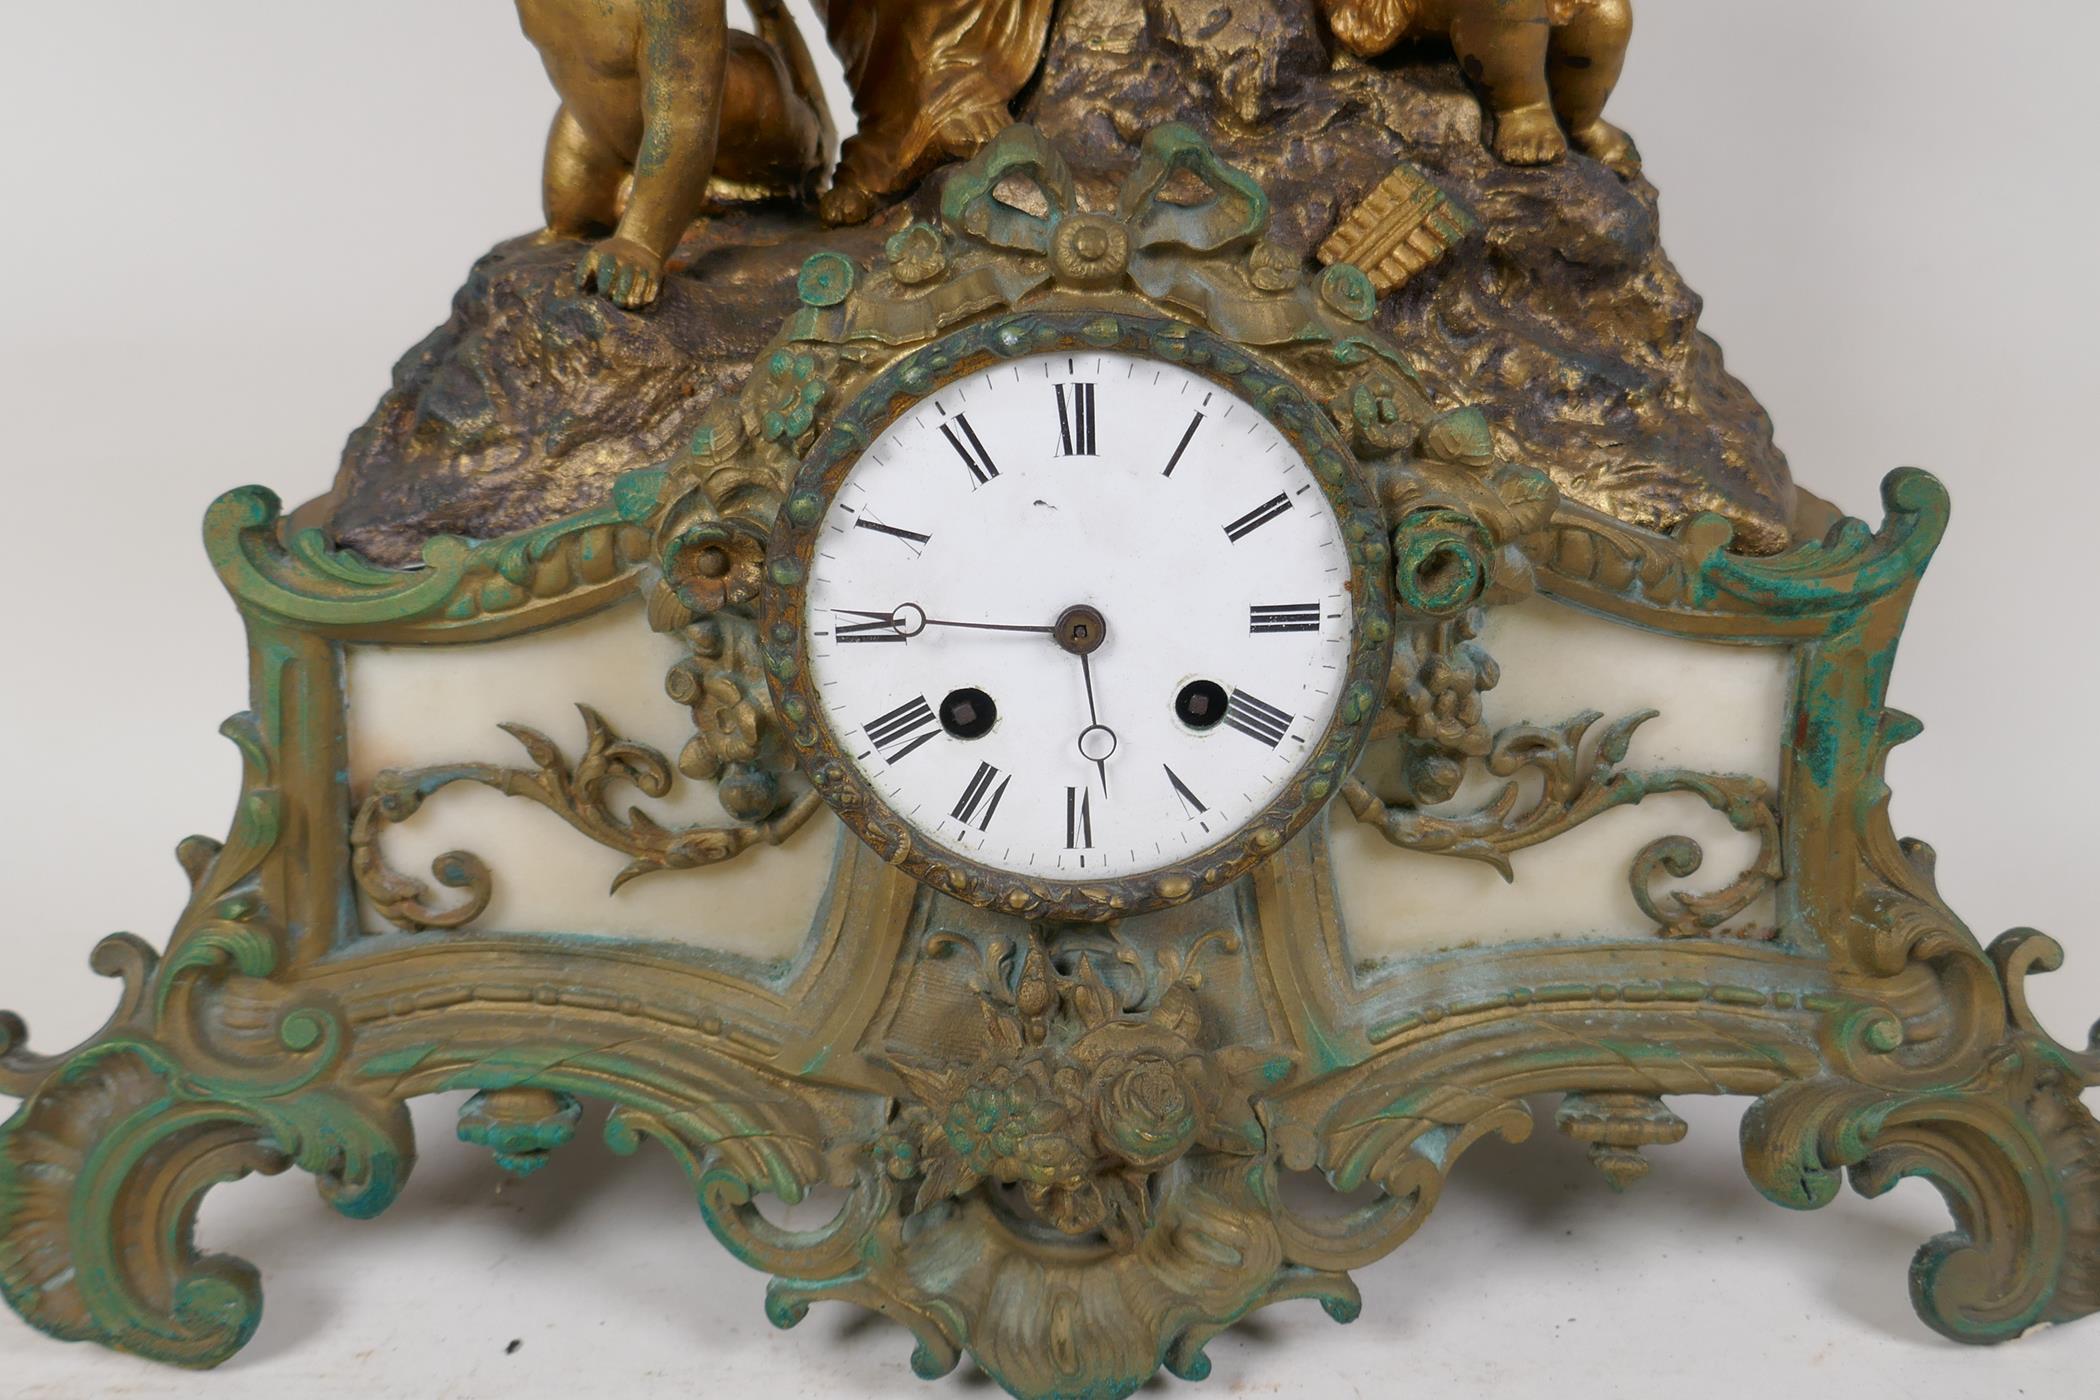 A C19th French spelter mantel clock adorned with Baccanalian figures, with twin train movement - Image 3 of 5